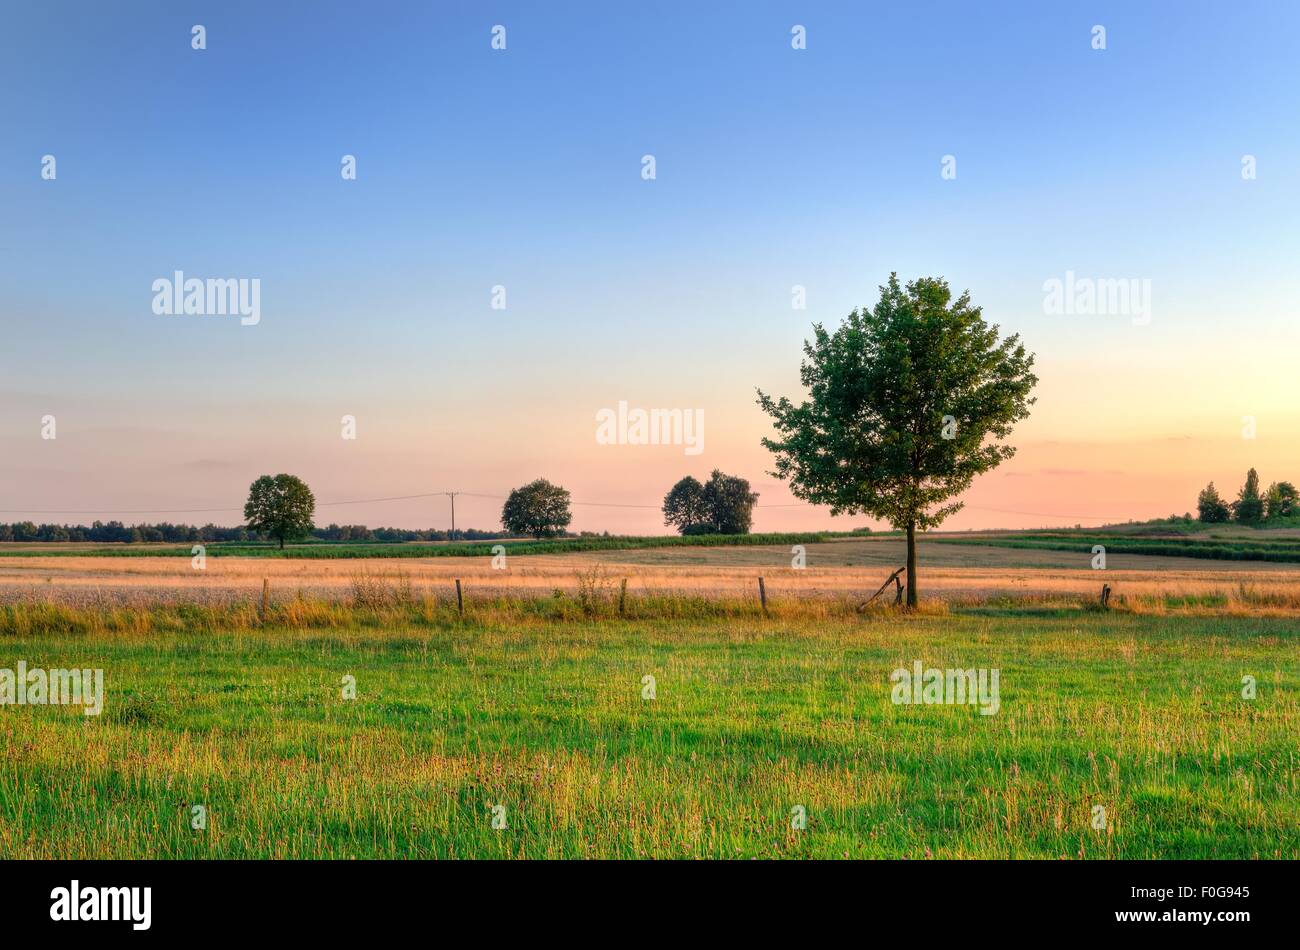 Summer countryside landscape. Grain field with dried grass, bushes and trees at sunset. Stock Photo